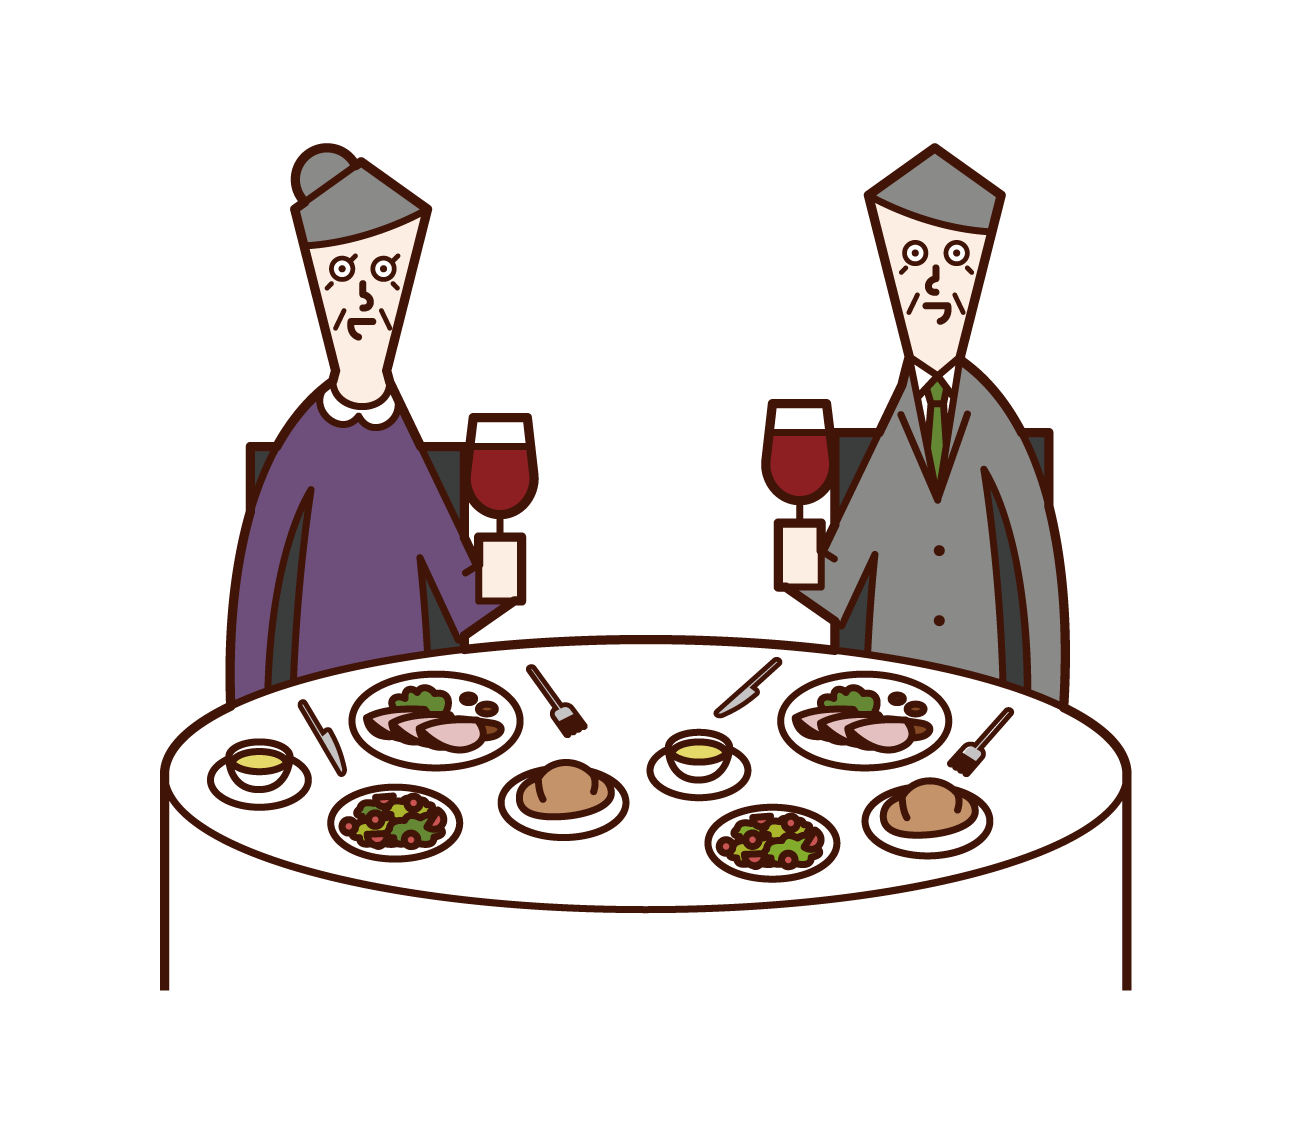 Illustration of an elderly couple eating deliciously in a restaurant